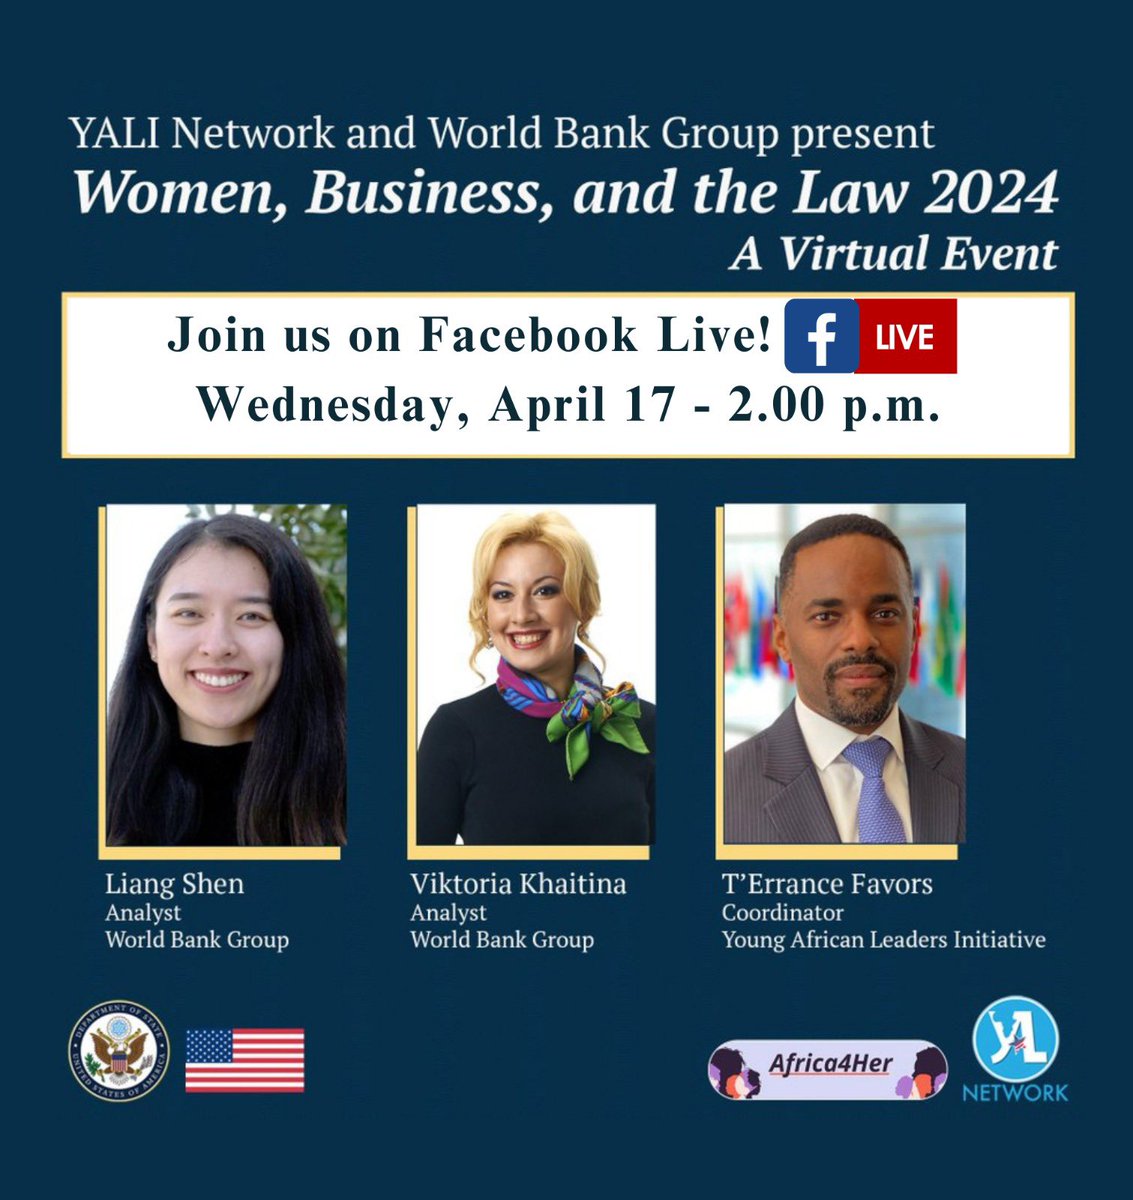 Join us on Wednesday for an engaging session featuring guest speakers Viktoria Khaitina and Liang Shen from the World Bank Group as they discuss their research and for women's economic empowerment worldwide.  ow.ly/g6ml50RfnlN #WorldBankGroup #Africa4Her #YALINetwork